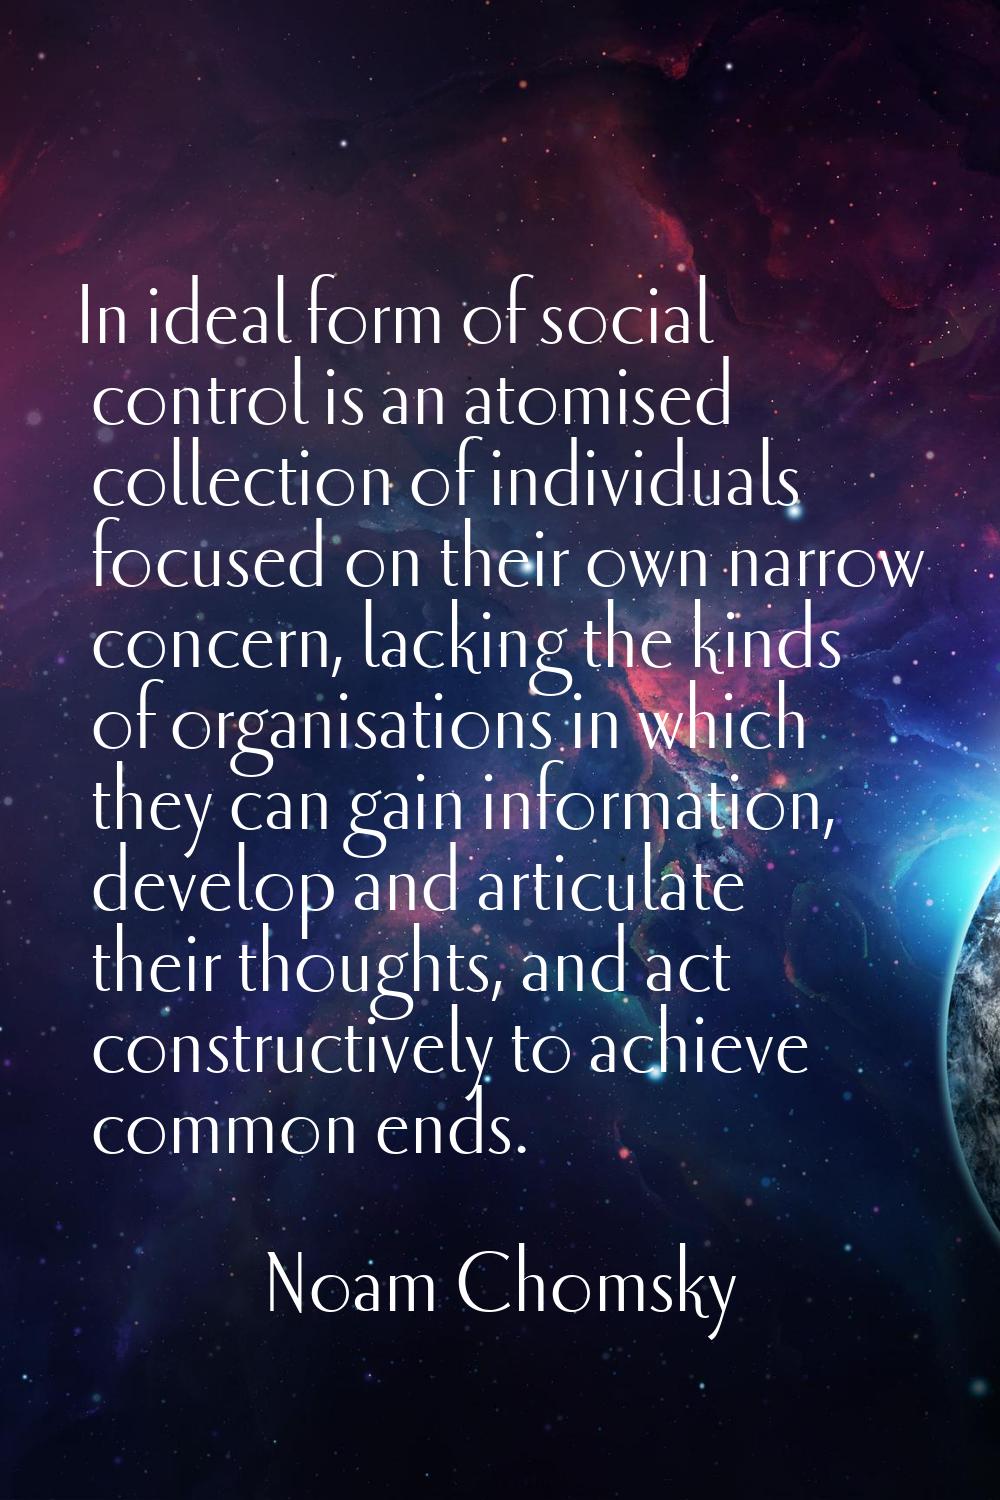 In ideal form of social control is an atomised collection of individuals focused on their own narro